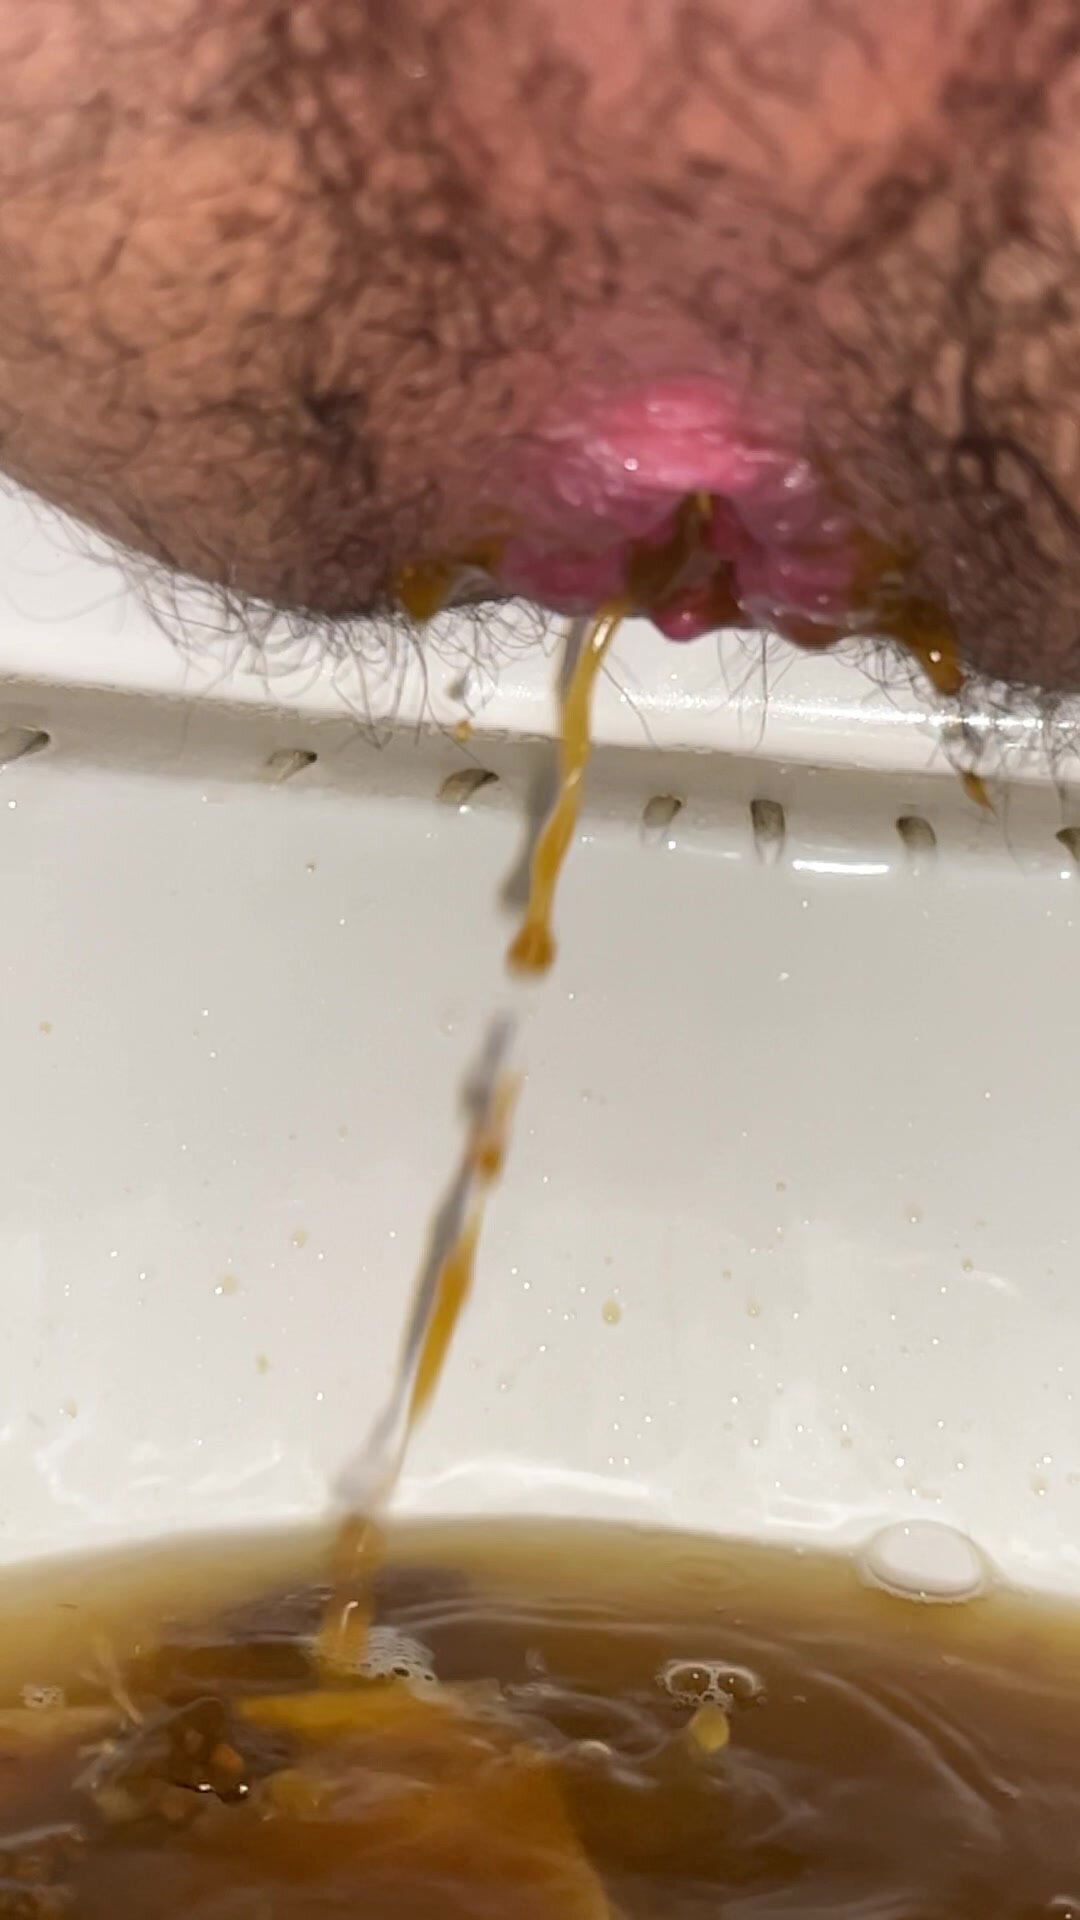 One of my best squirts so far~